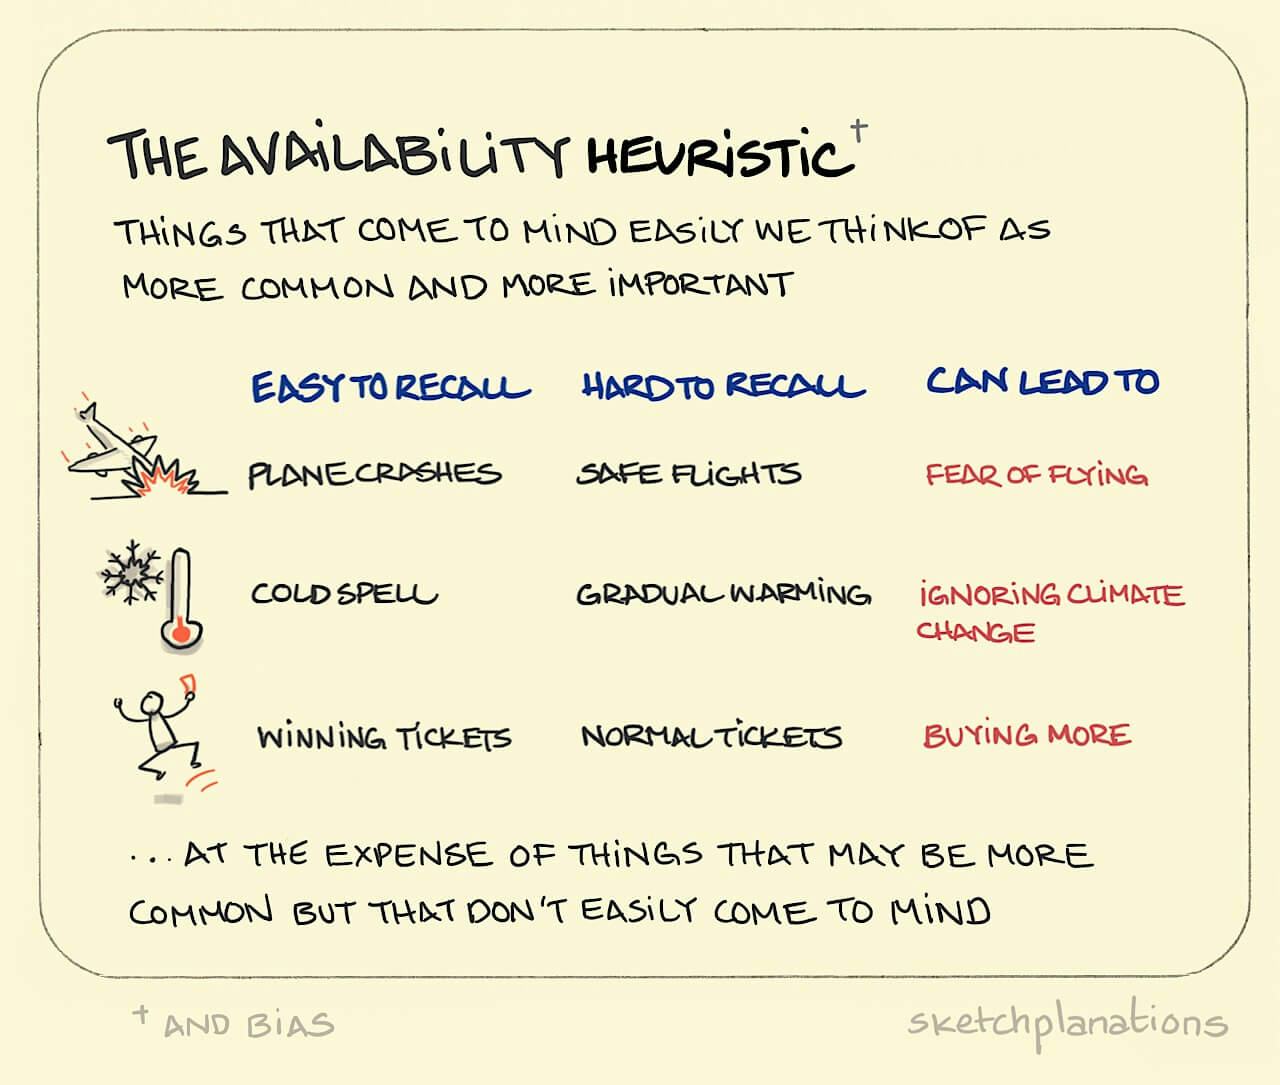 The availability heuristic (and bias) - Sketchplanations